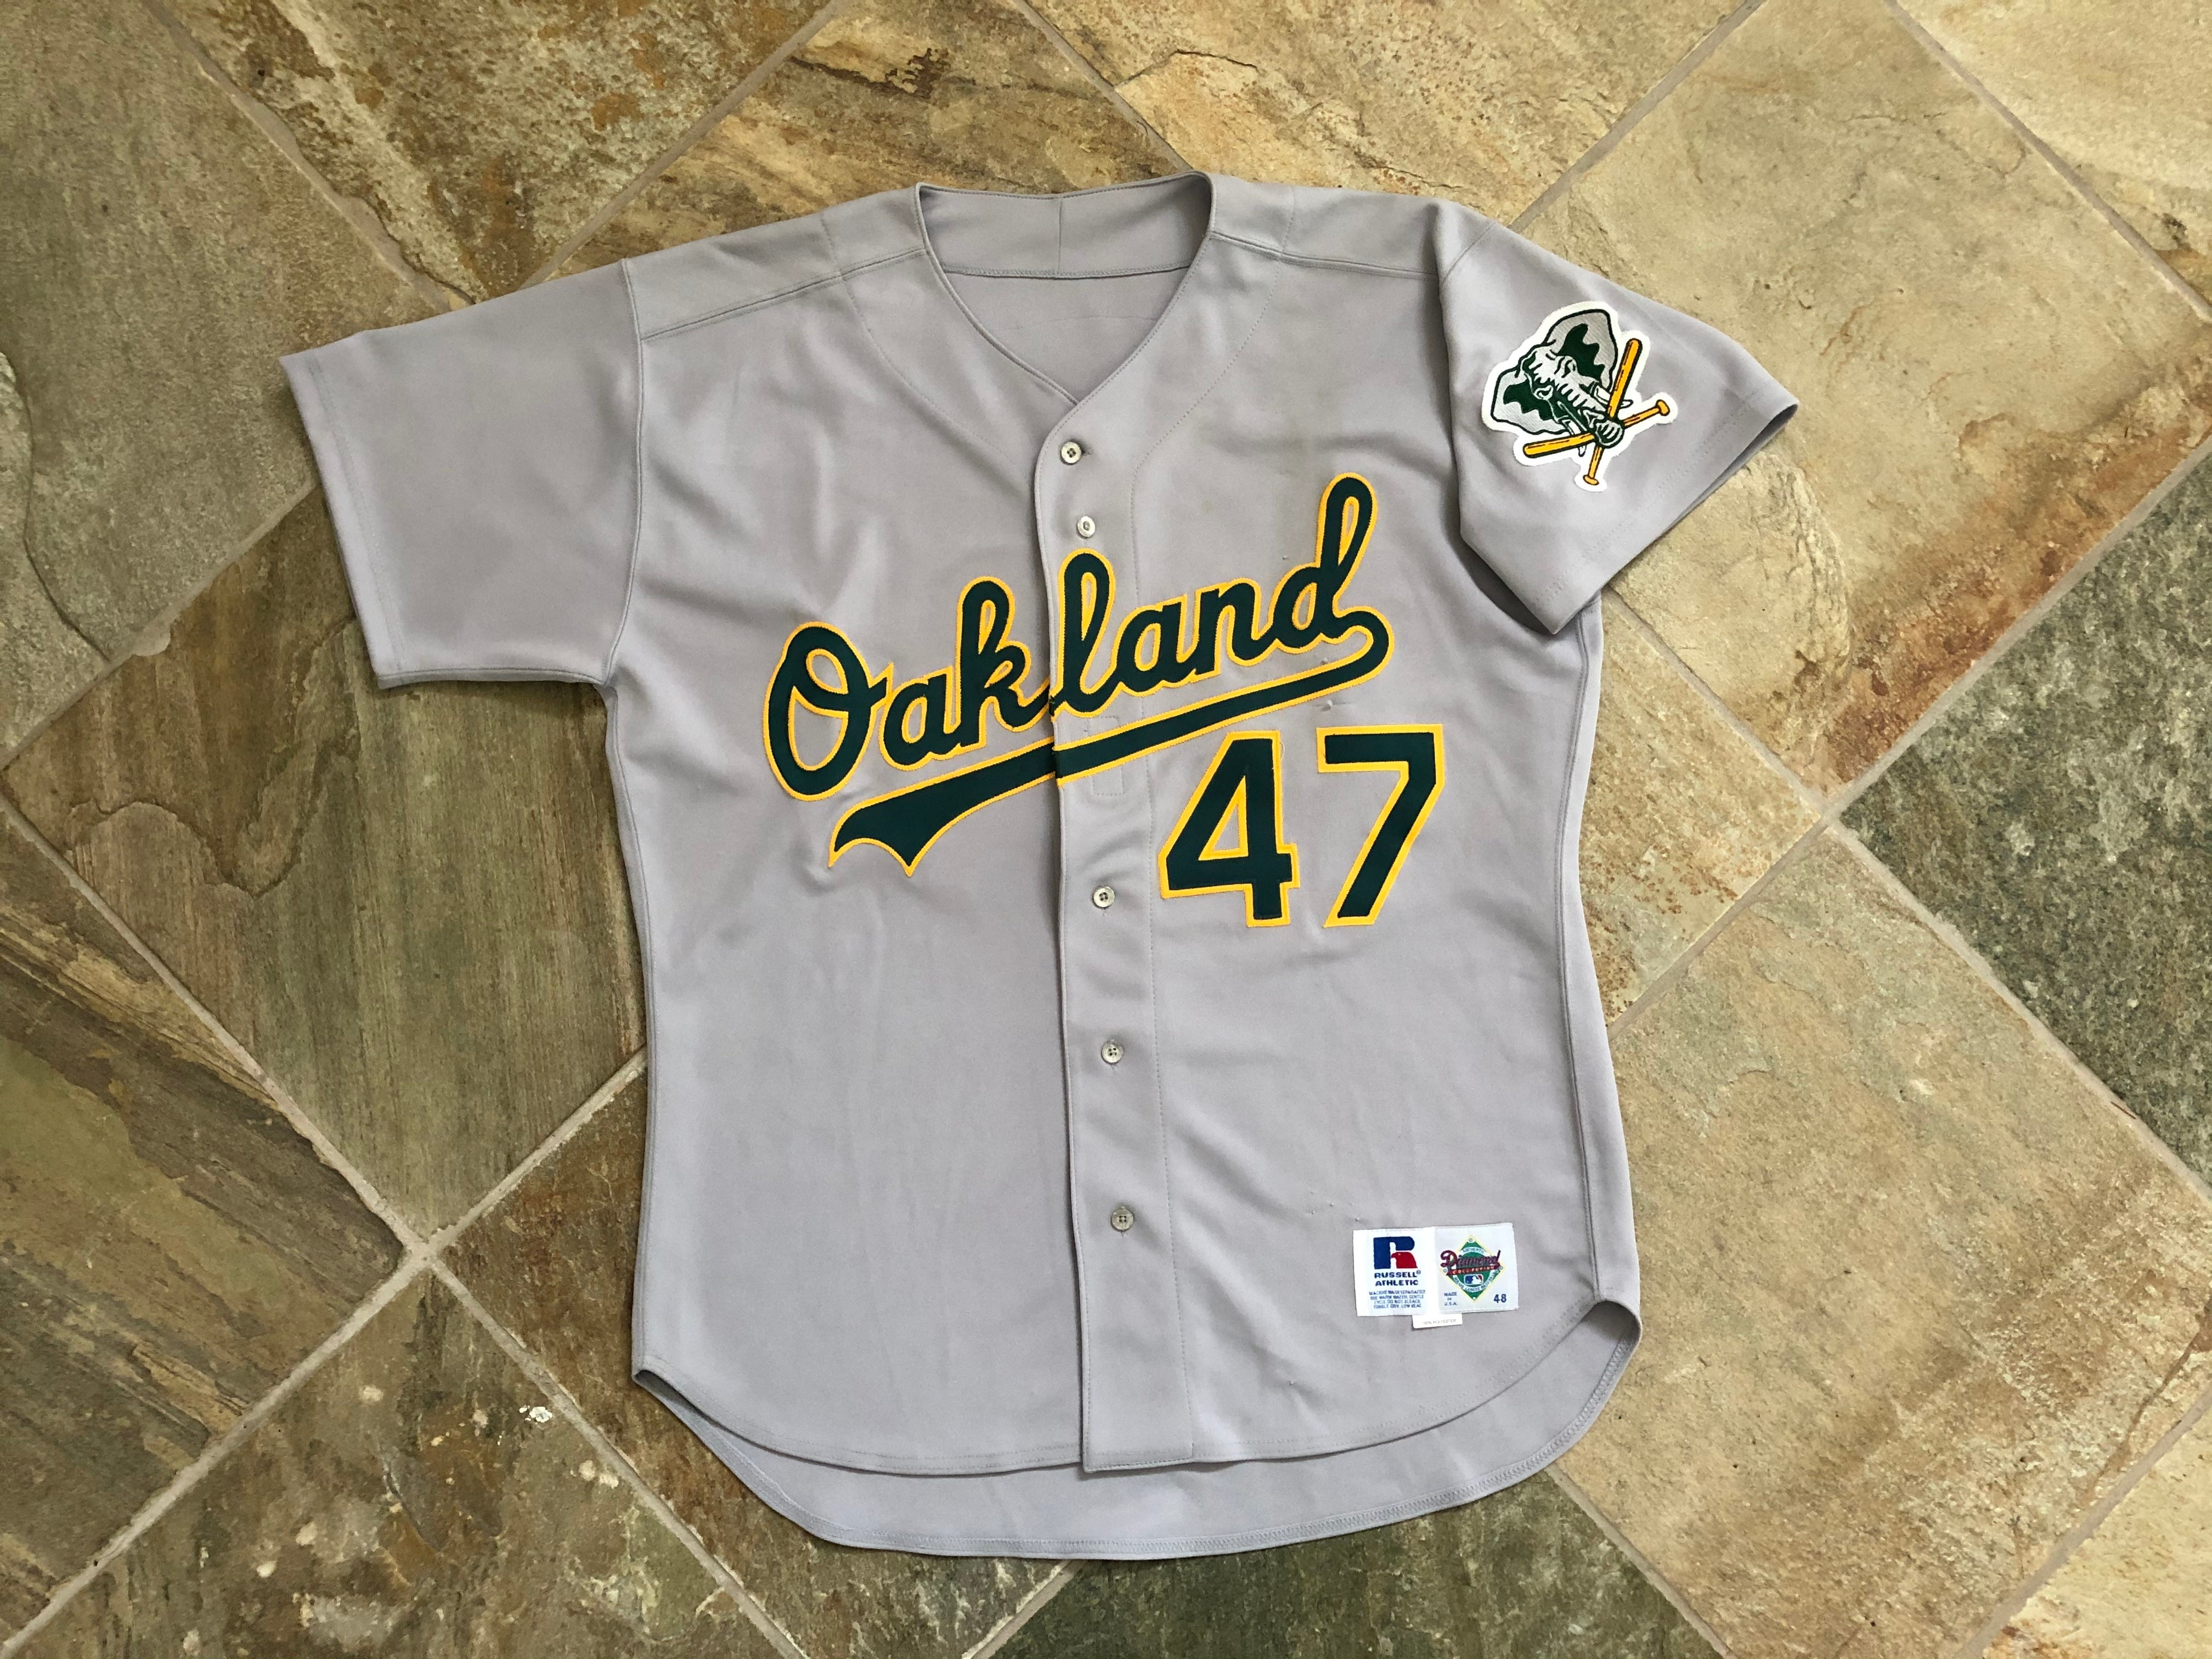 Vintage 1980s Oakland Athletics A's Jersey by Rawlings